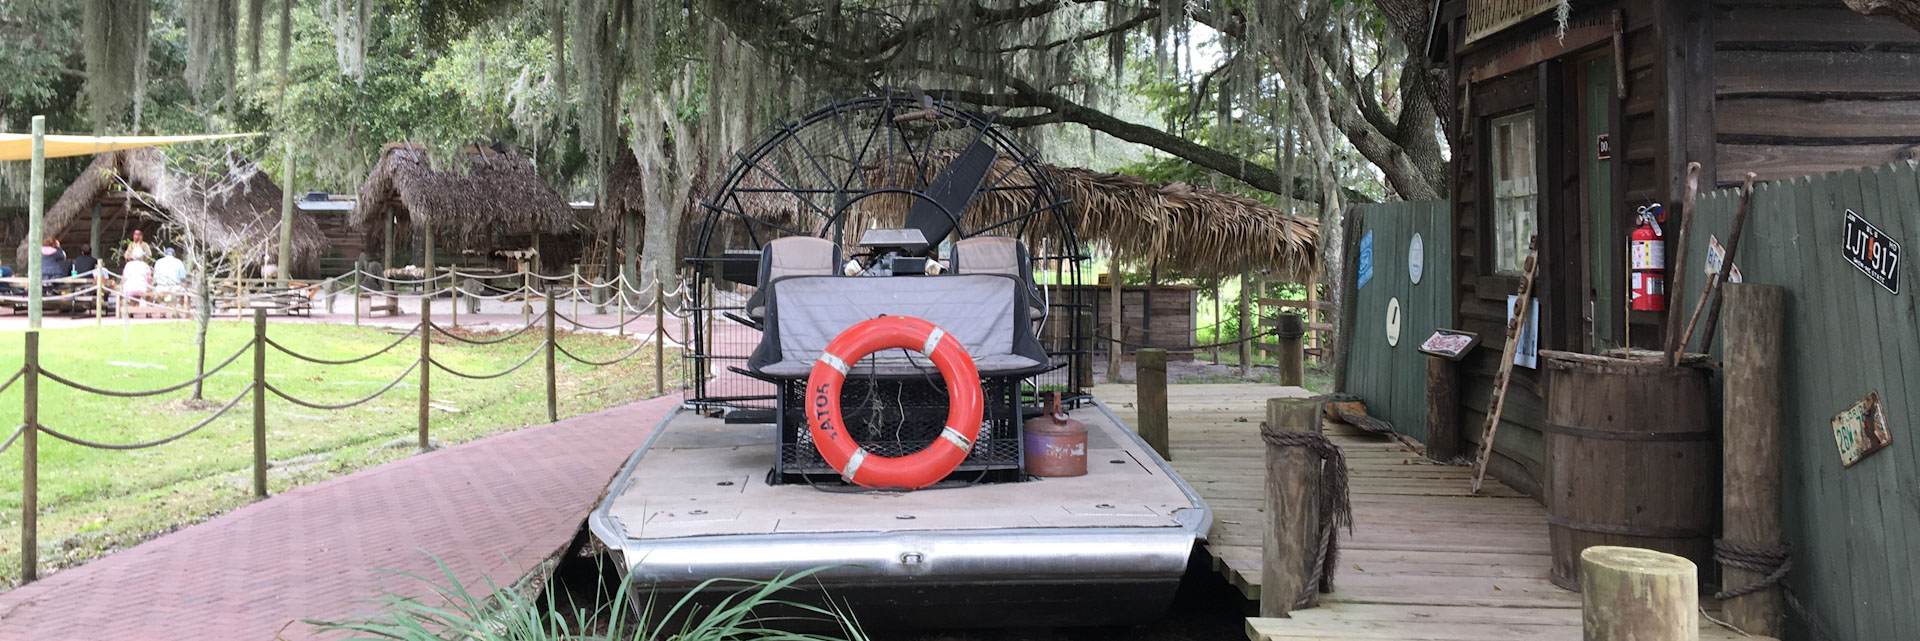 Boggy Creek Airboats